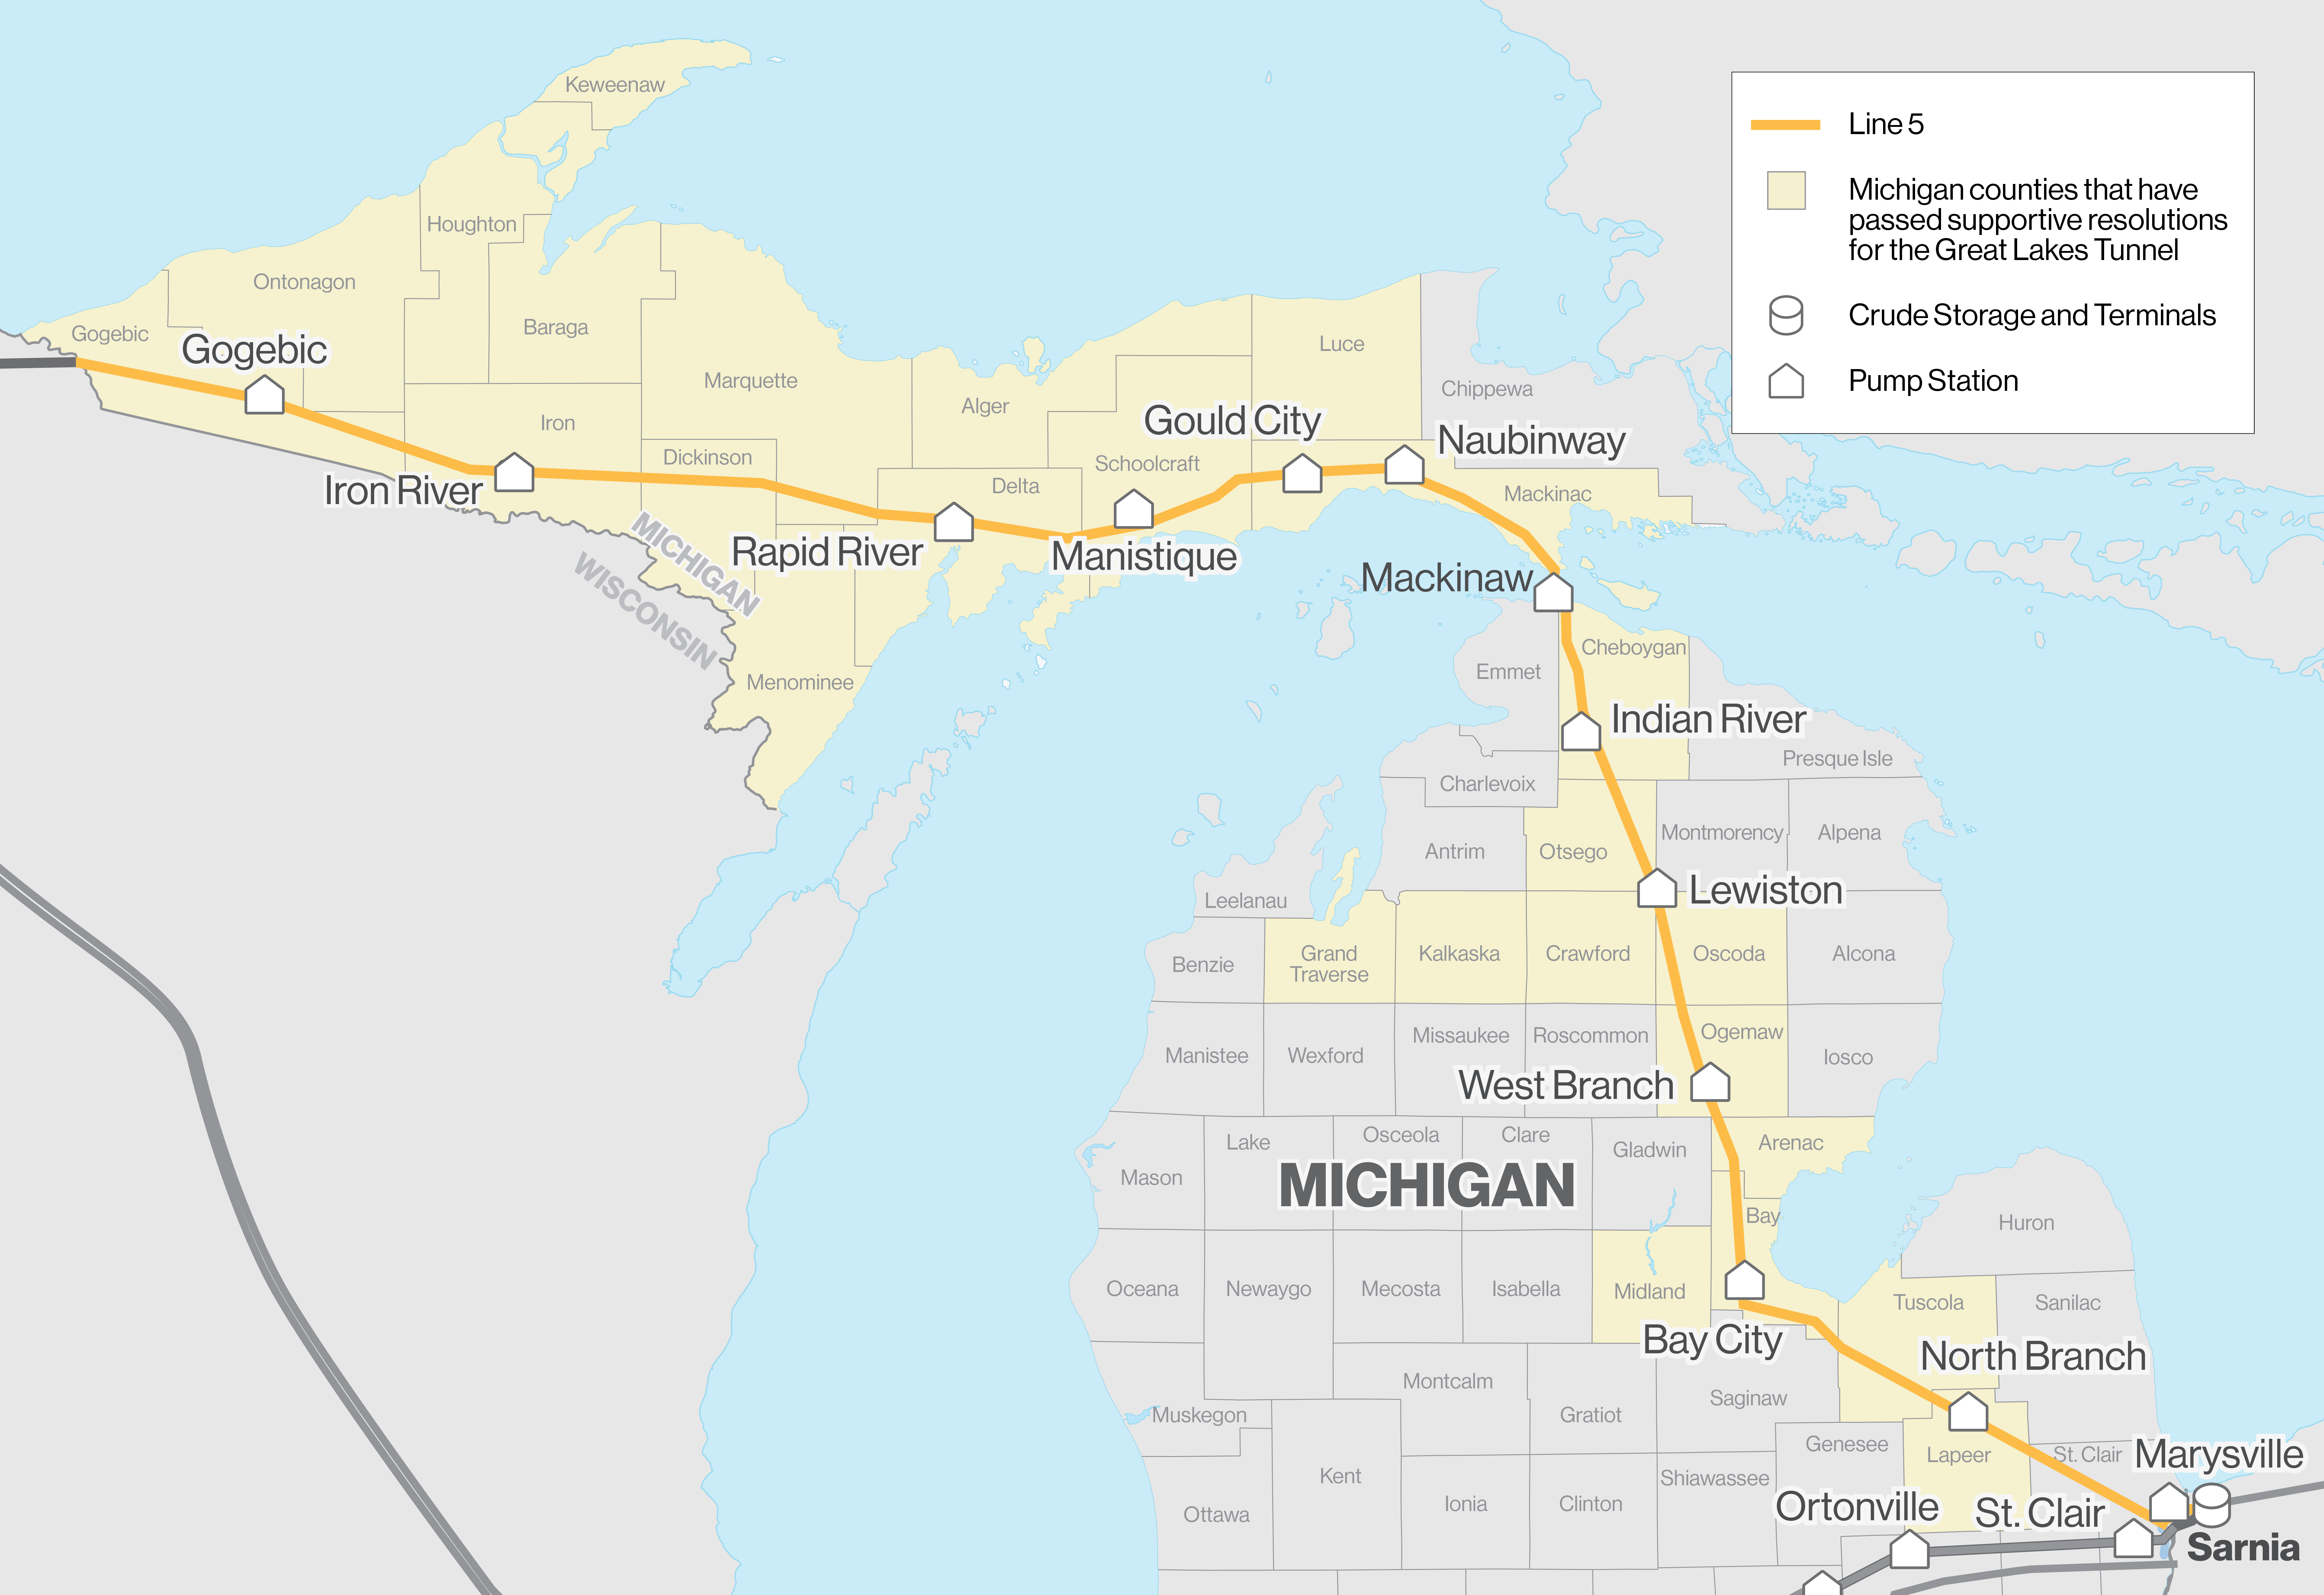 A map of Michigan counties